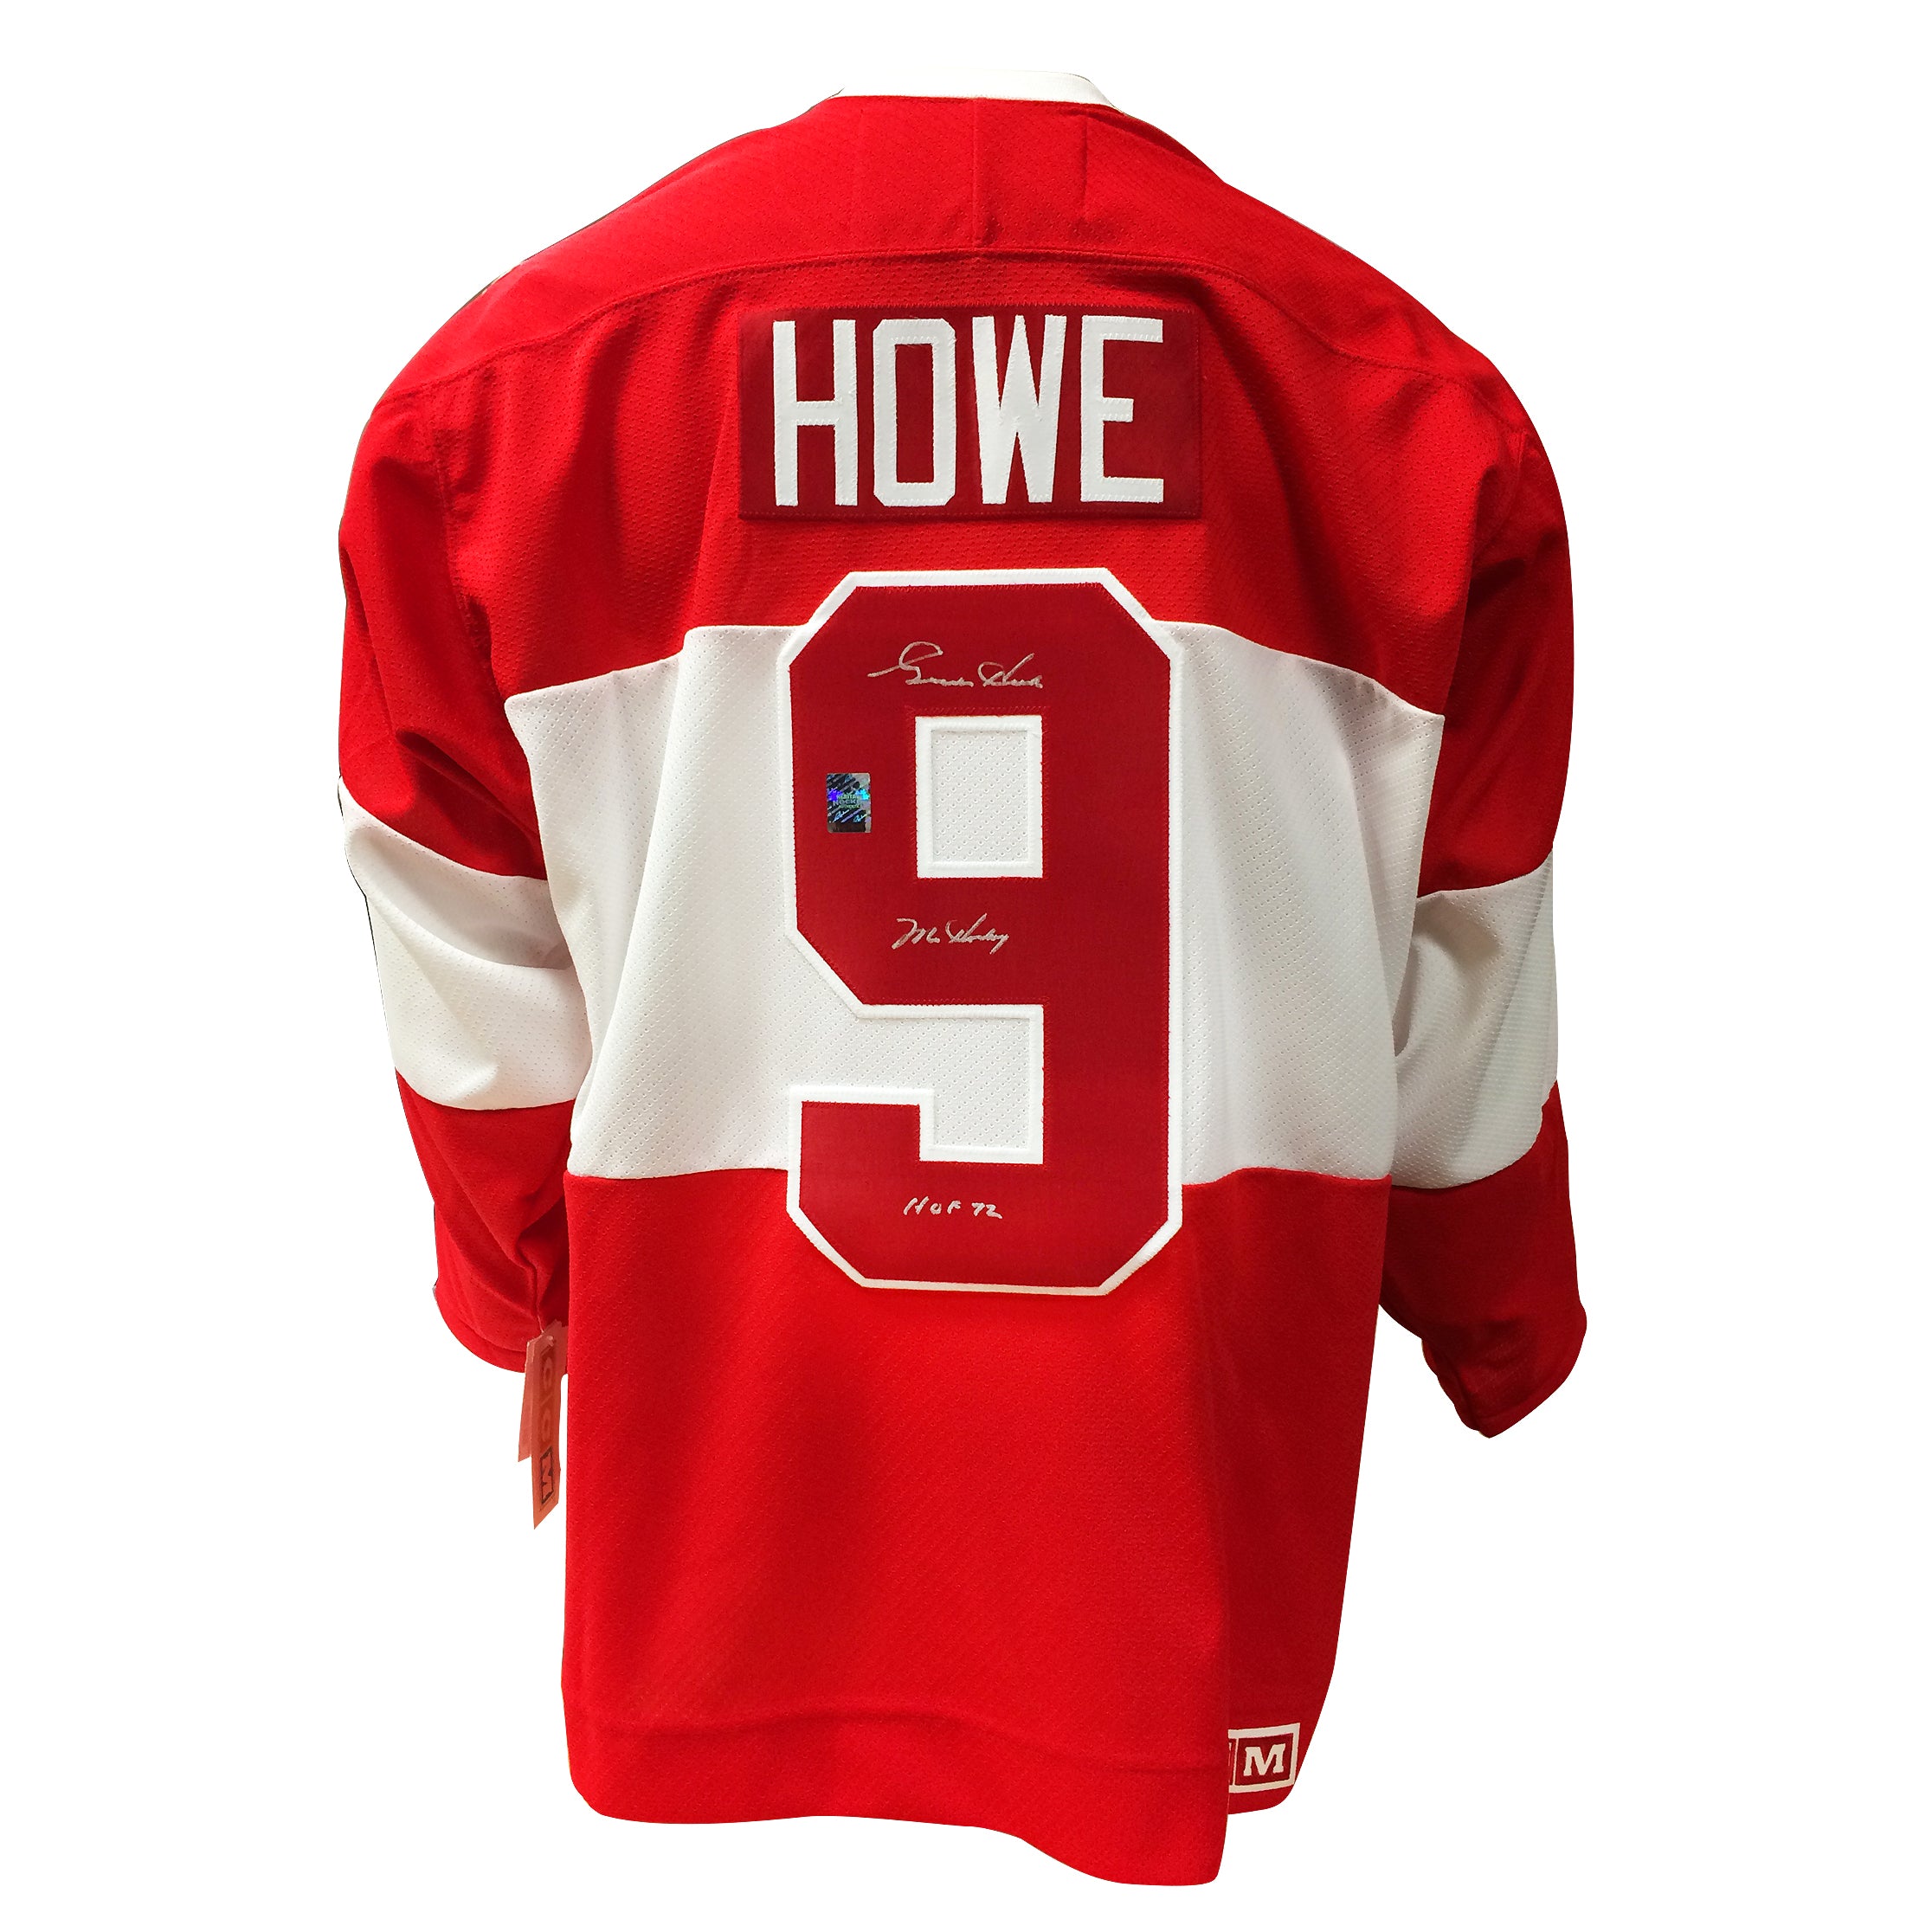 Gordie Howe #9 Detroit Red Wings Adidas Road Primegreen Authentic Jersey by Vintage Detroit Collection